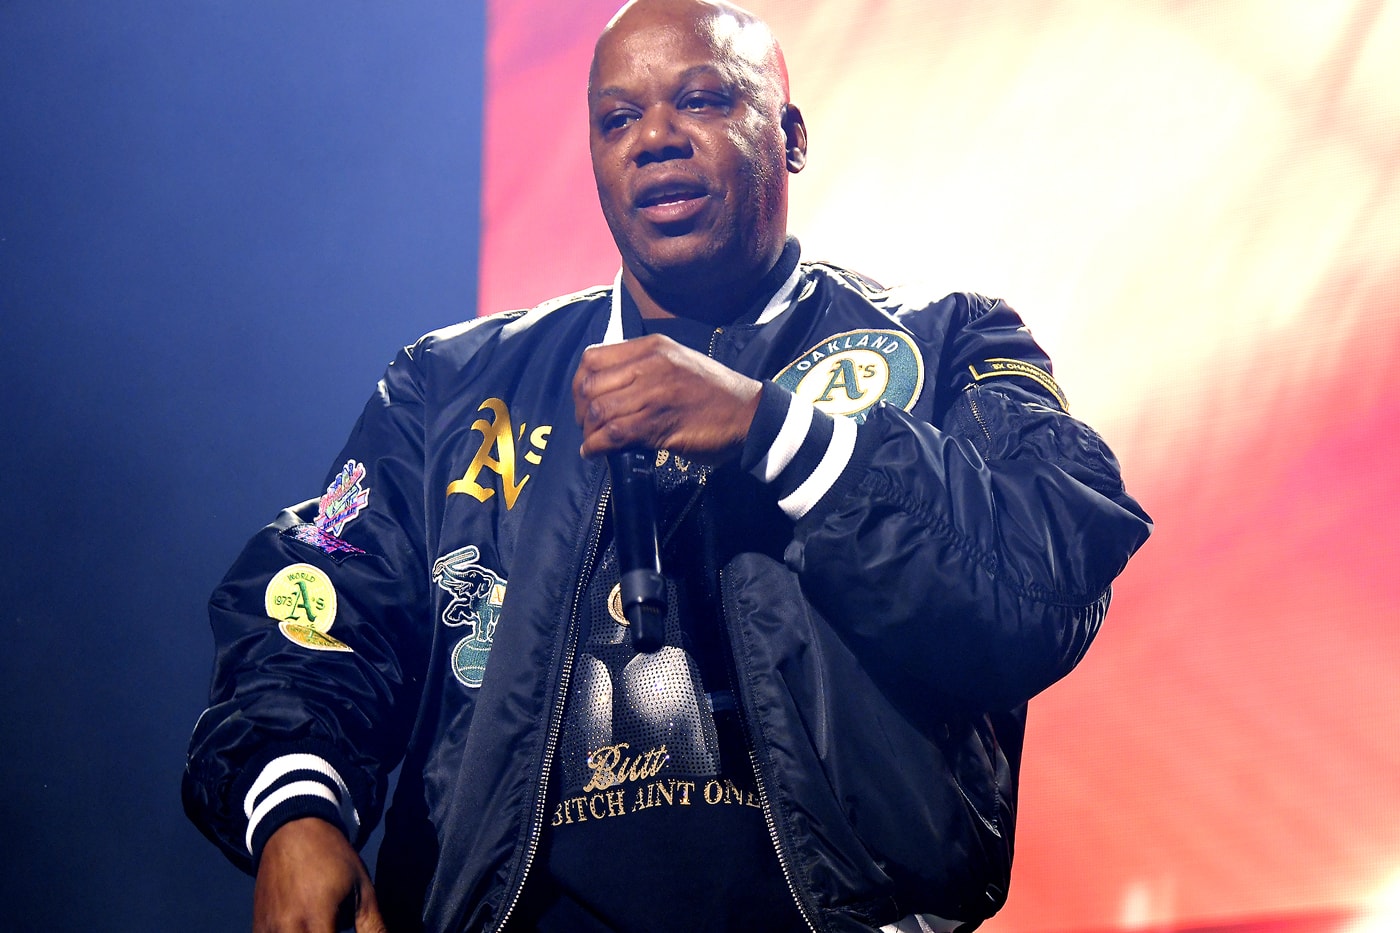 Bay Area rap legend Too $hort honored with street renamed after him in  Oakland - ABC7 San Francisco